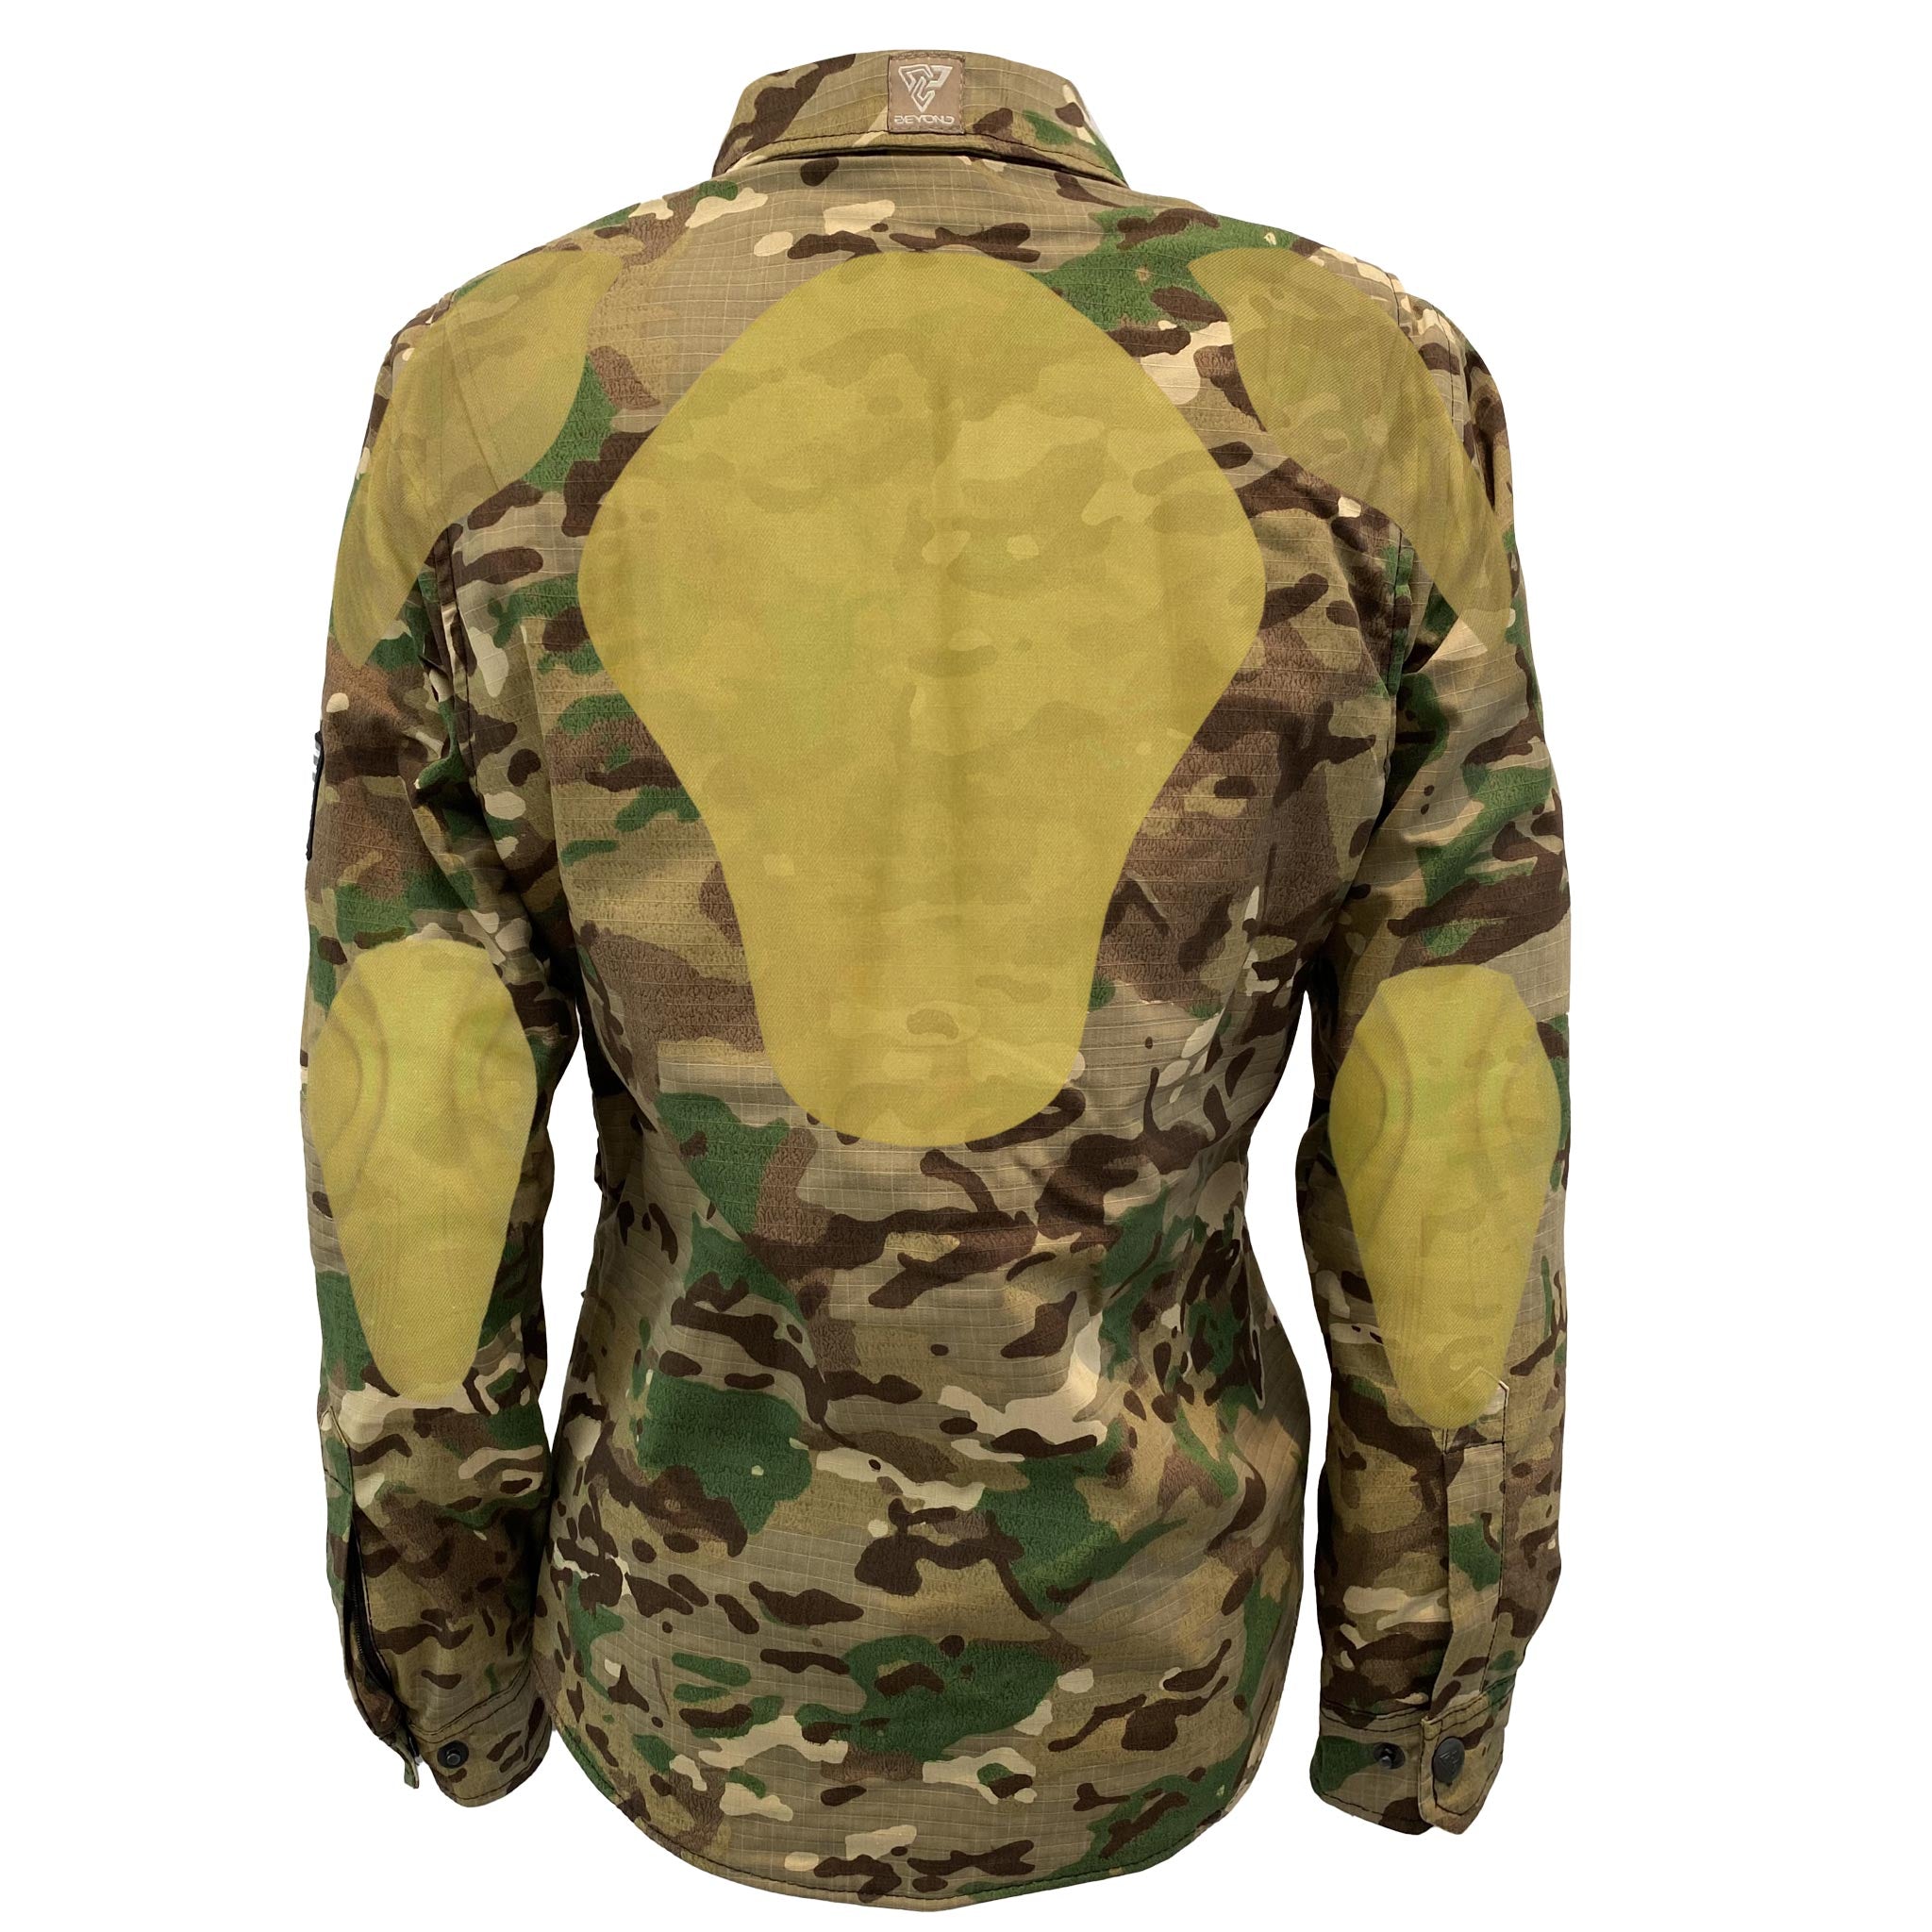 Protective Camouflage Shirt for Women "Delta Four" - Light Color with Pads